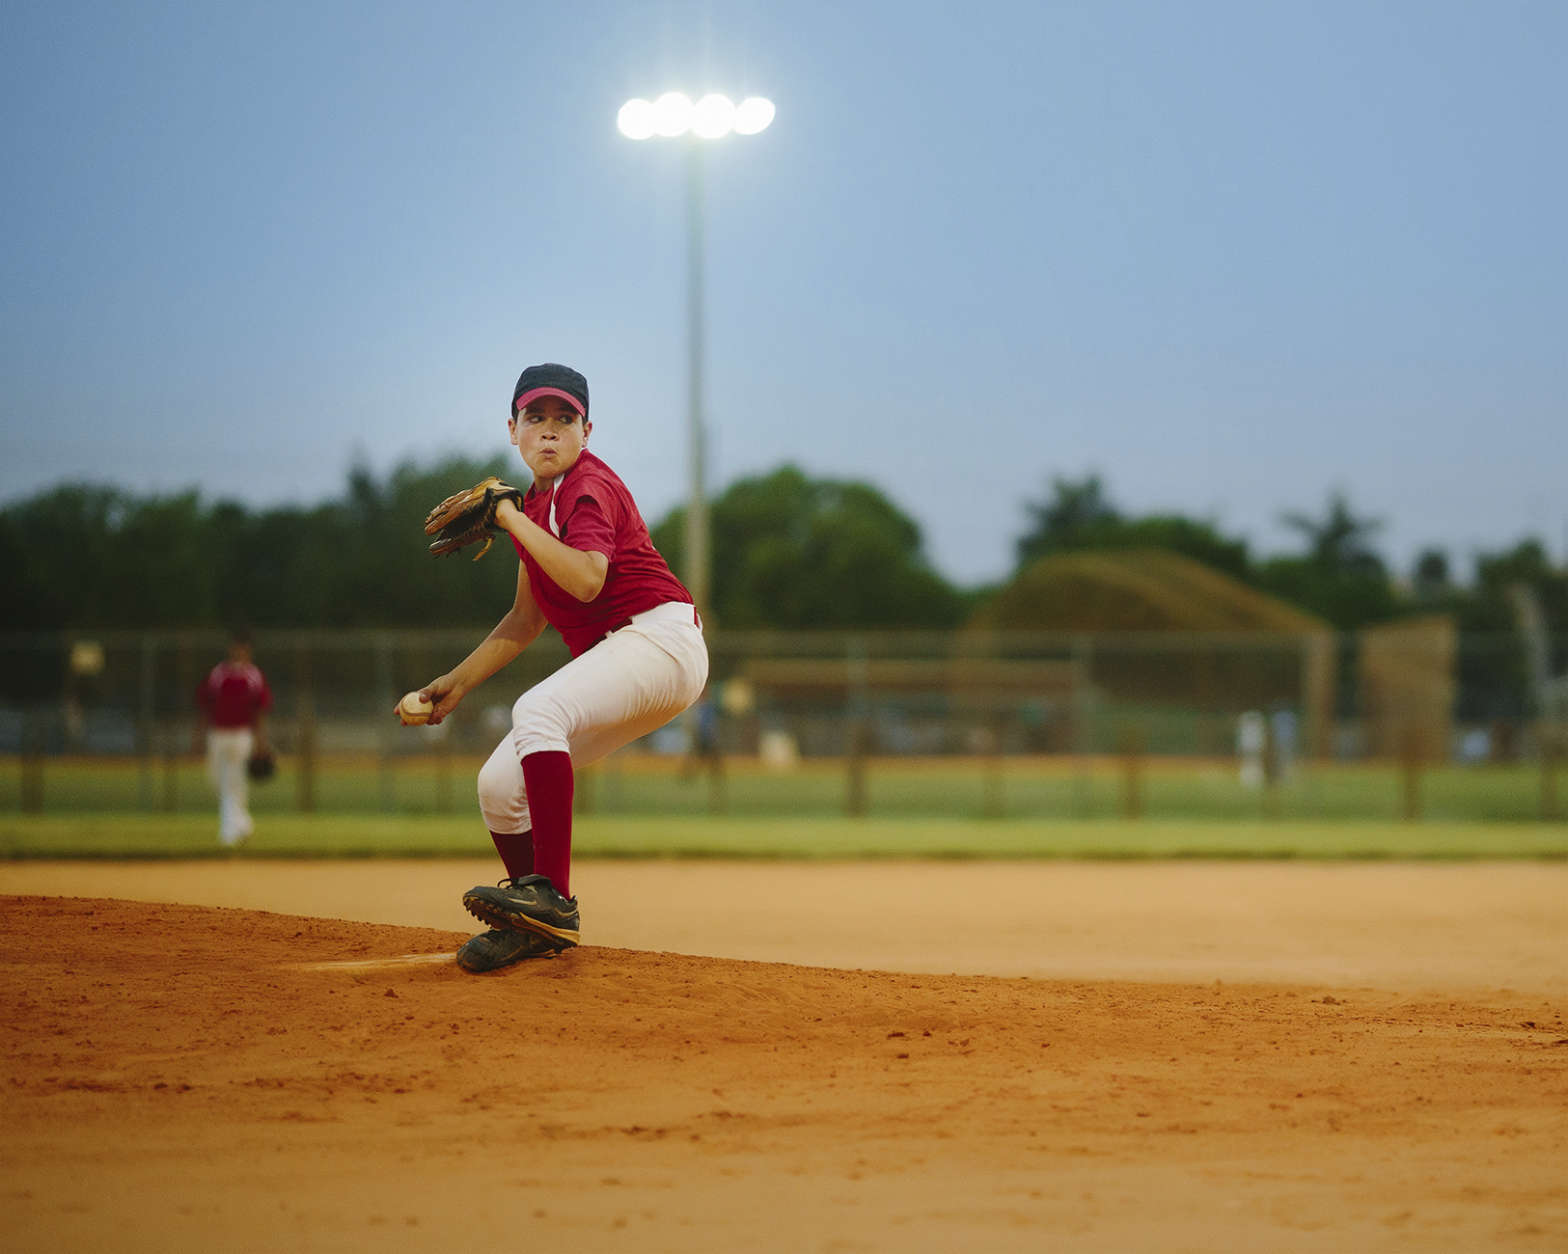 Young athletes and cardiac arrest: what’s the deal?